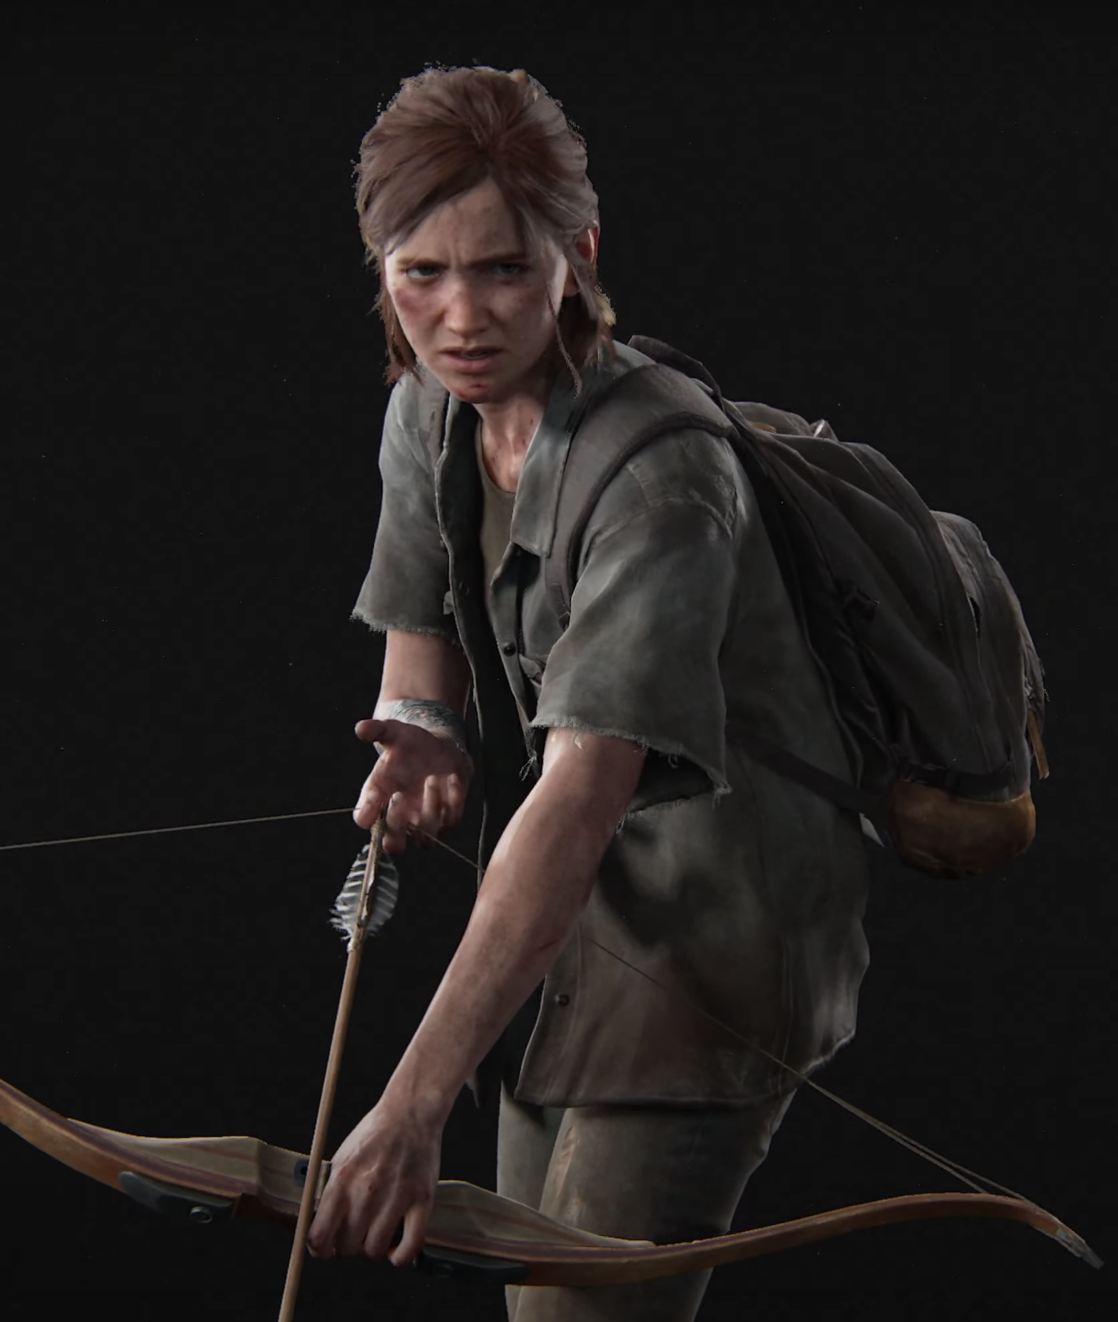 Who Plays Ellie In The Last Of Us 2? Who Is Ellie Williams? - News